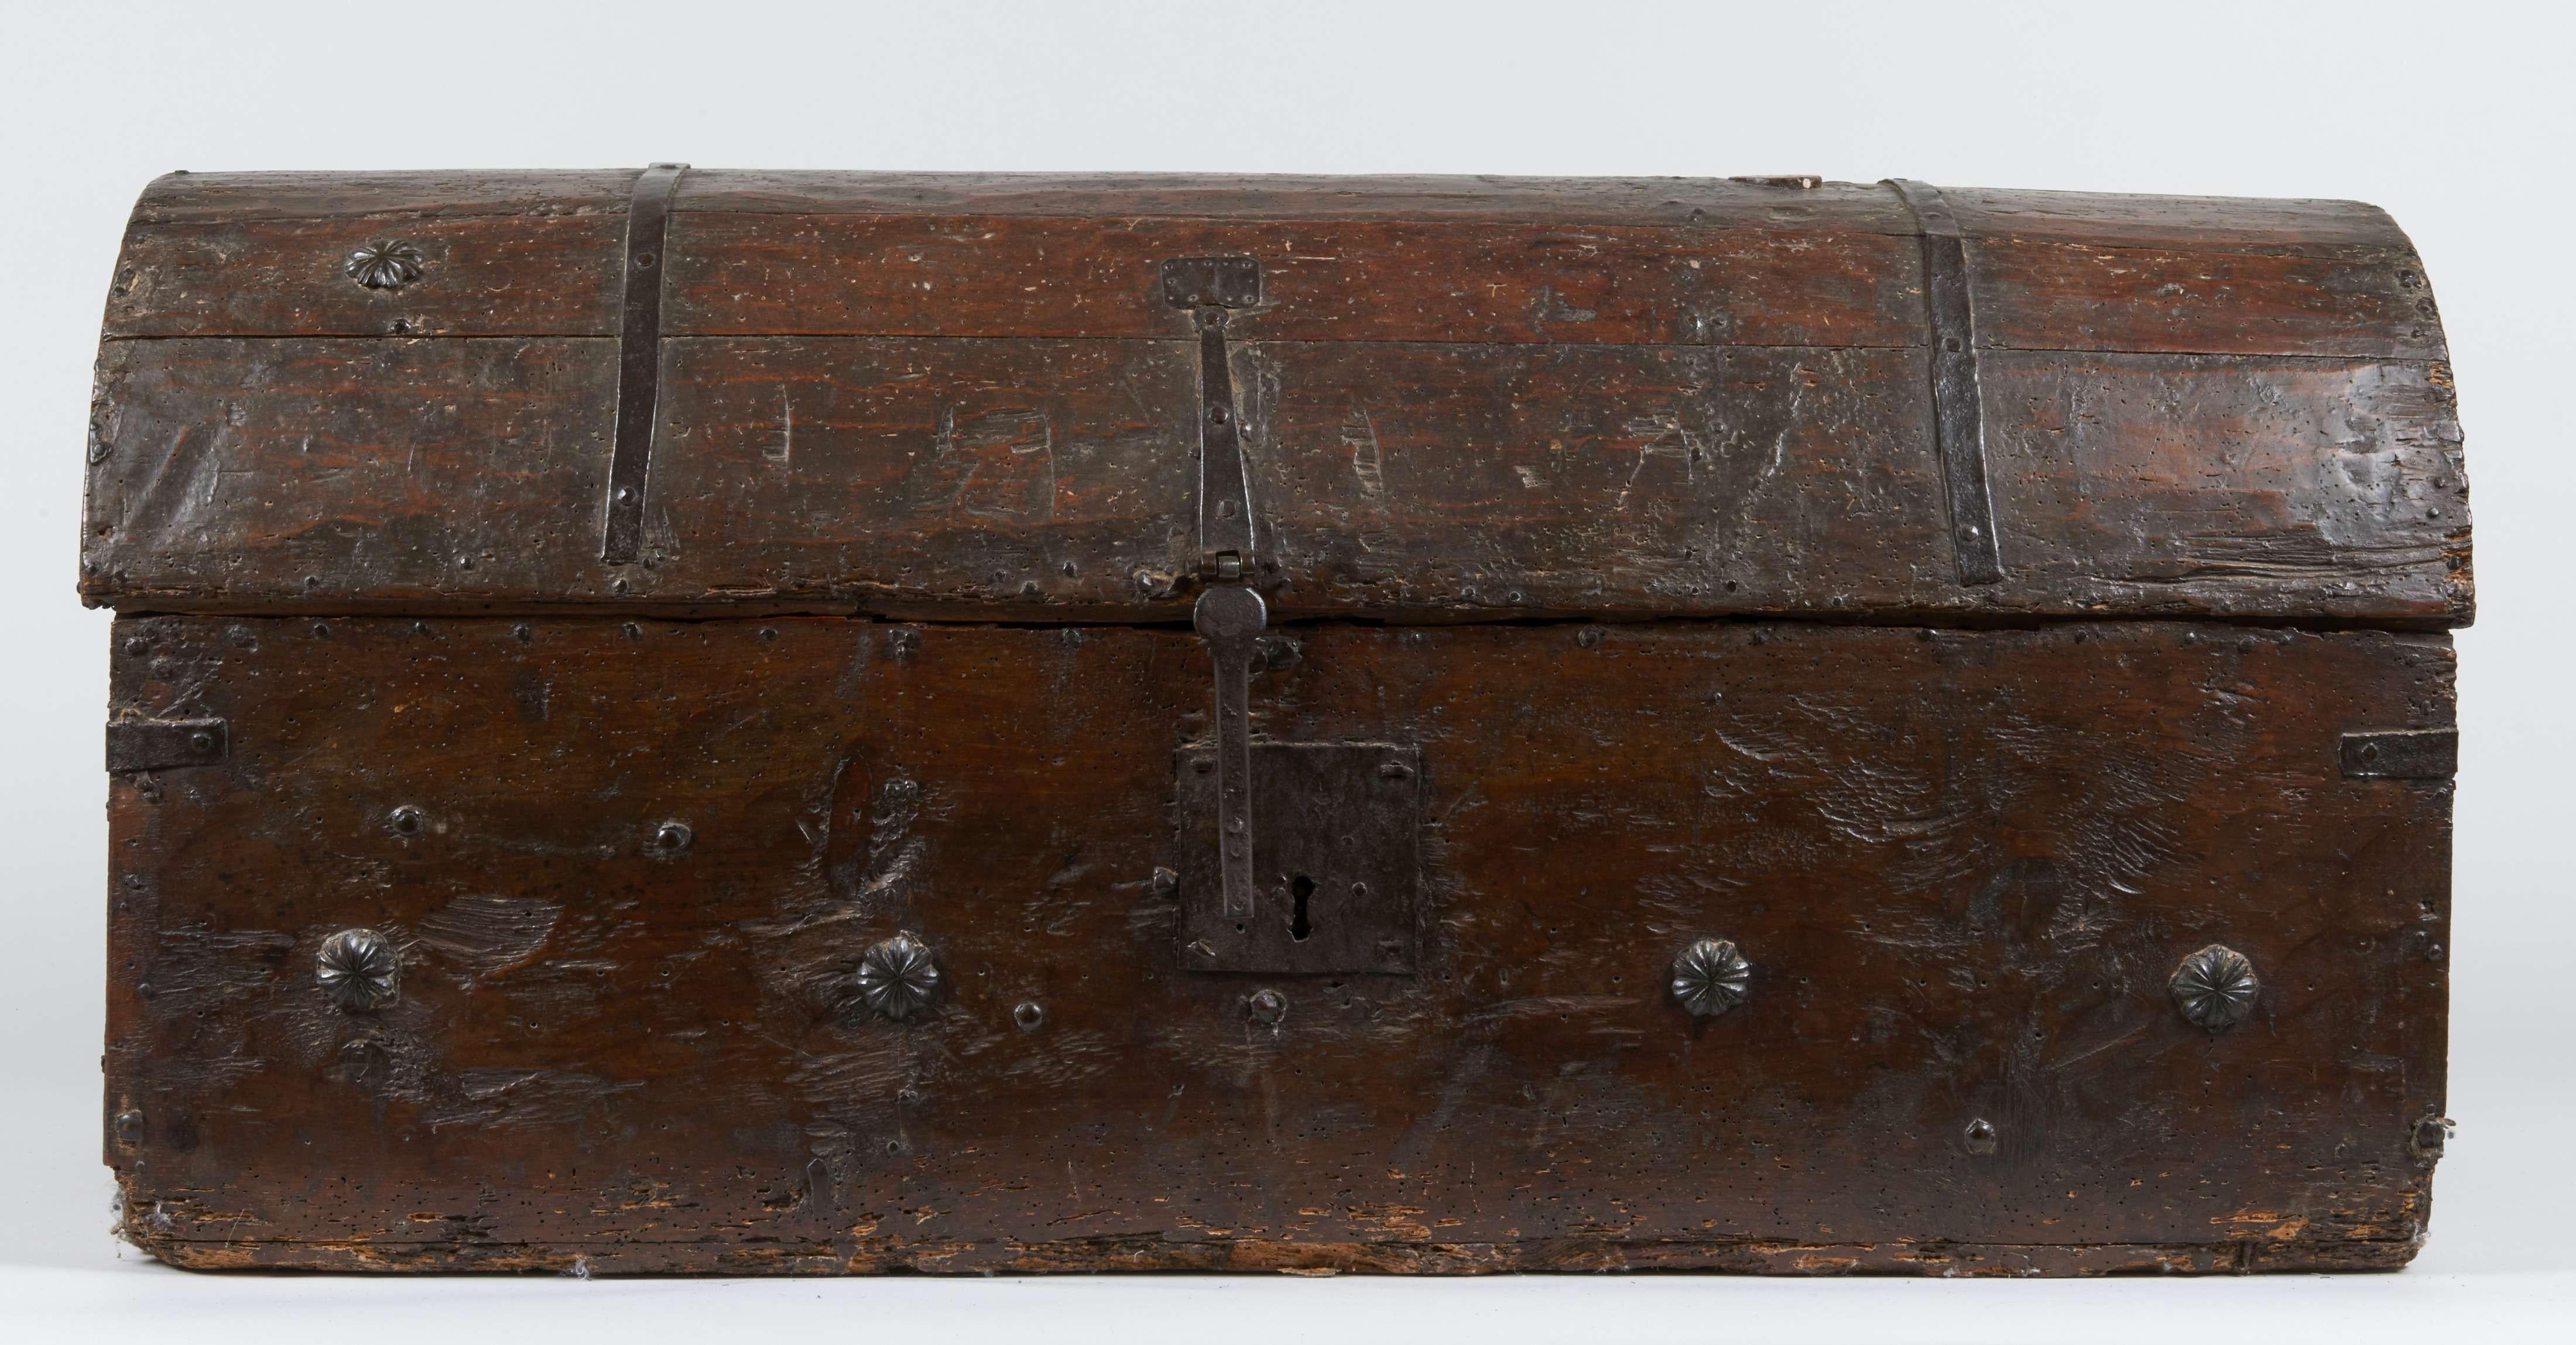 CURVED LID CHEST

ORIGIN : SPAIN
PERIOD : EARLY 16th CENTURY, CA. 1500

Height : 49 cm
Length : 106 cm
Depth : 42 cm

Softwood
Wrought iron, nails, hasp lock


This fine chest or travel case is made of softwood. Its oblong shape is